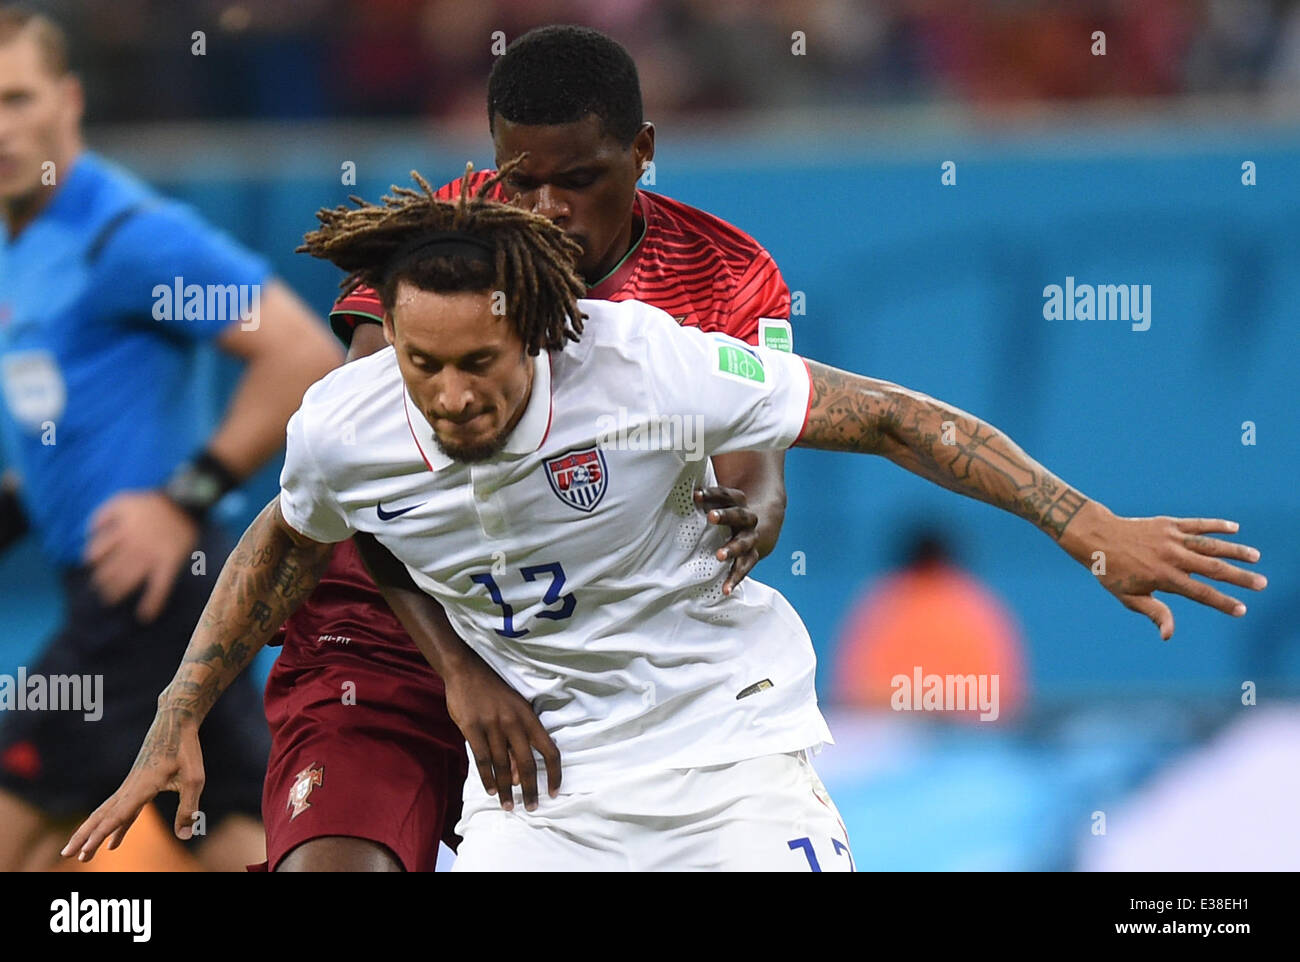 Manaus, Brazil. 22nd June, 2014. William Carvalho (L) of Portugal in action against Jermaine Jones of USA during the FIFA World Cup 2014 group G preliminary round match between the USA and Portugal at the Arena Amazonia Stadium in Manaus, Brazil, 22 June 2014. Photo: Marius Becker/dpa/Alamy Live News Stock Photo